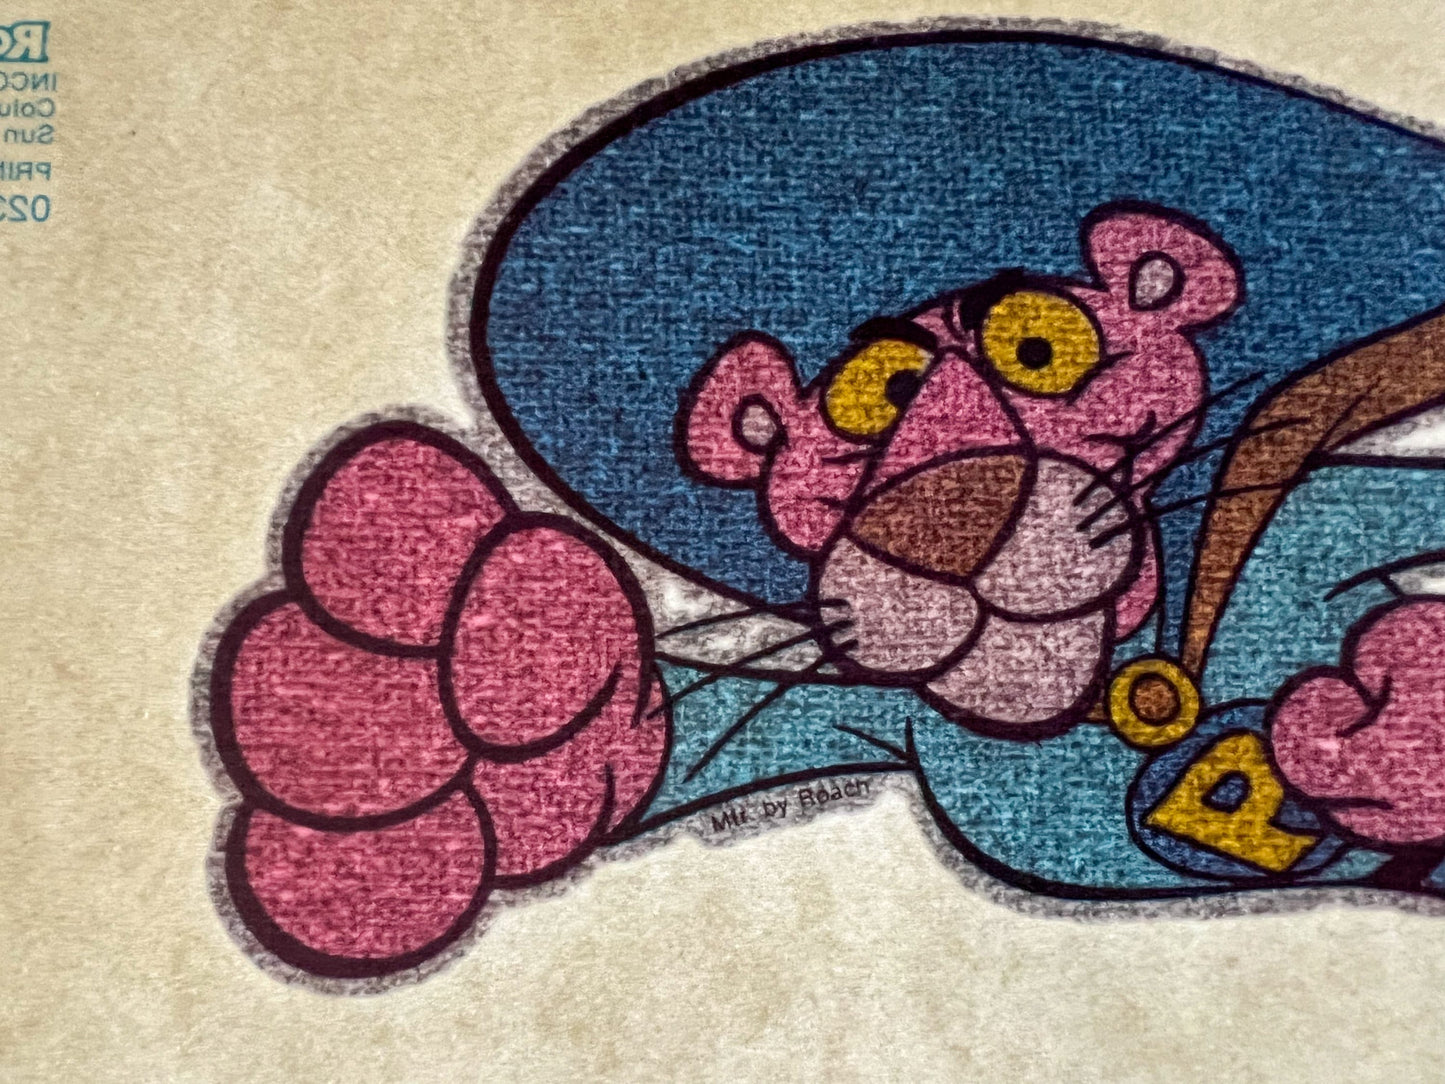 Pink Panther Super Panther Vintage Glitter Iron On Heat Transfer